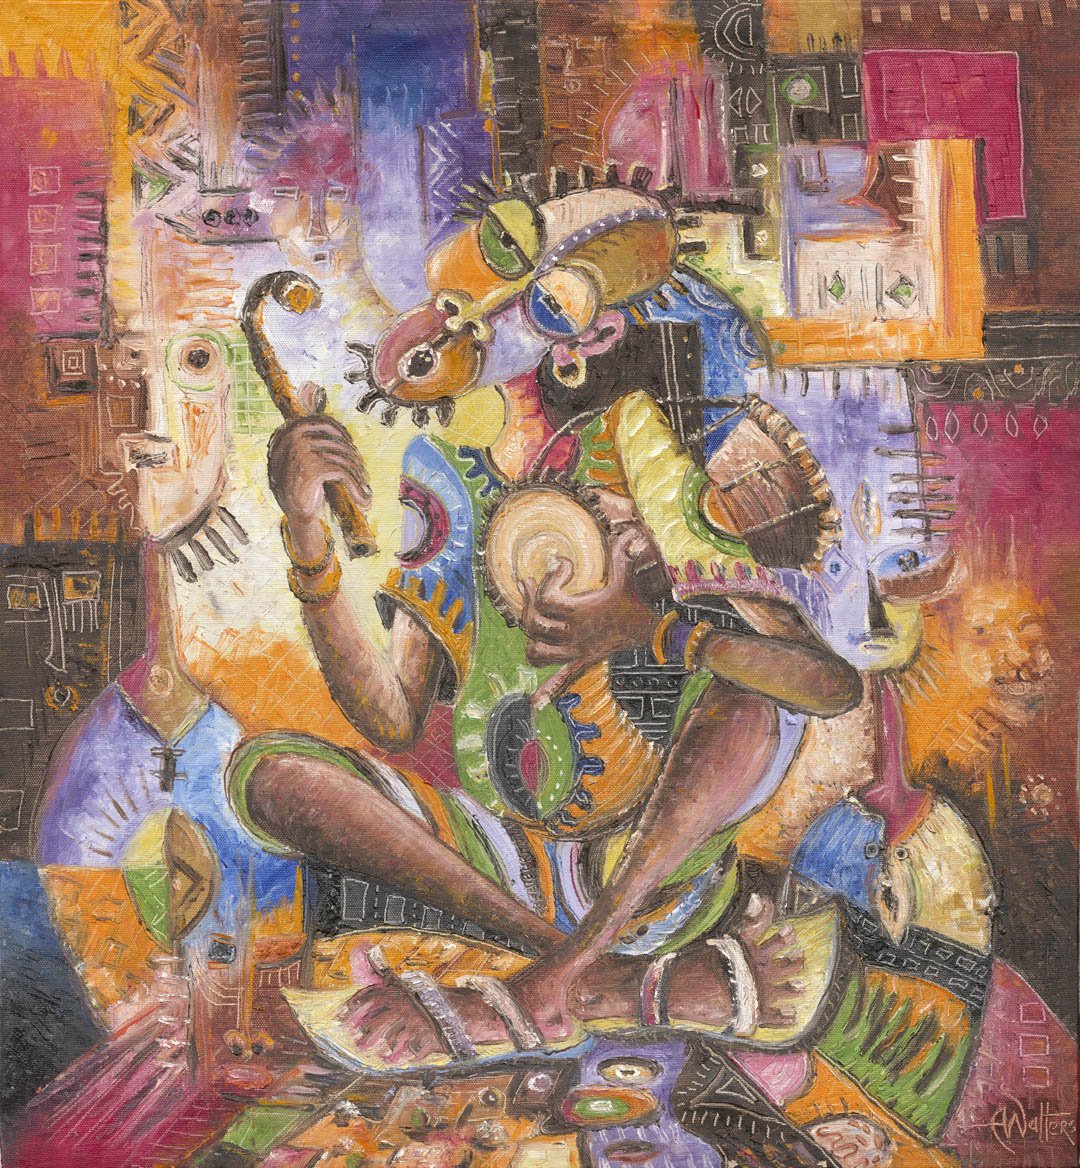 #AfricanArt #drummer #oilpainting or #artprint 
Painting of the Day. The Drummer I
 > > artcameroon.com/the-drummer-af…
A street musician playing drums for tips, seen with some scattered coins. The painting is full of bright colors and patterns, and the atmosphere is festive and joyful.